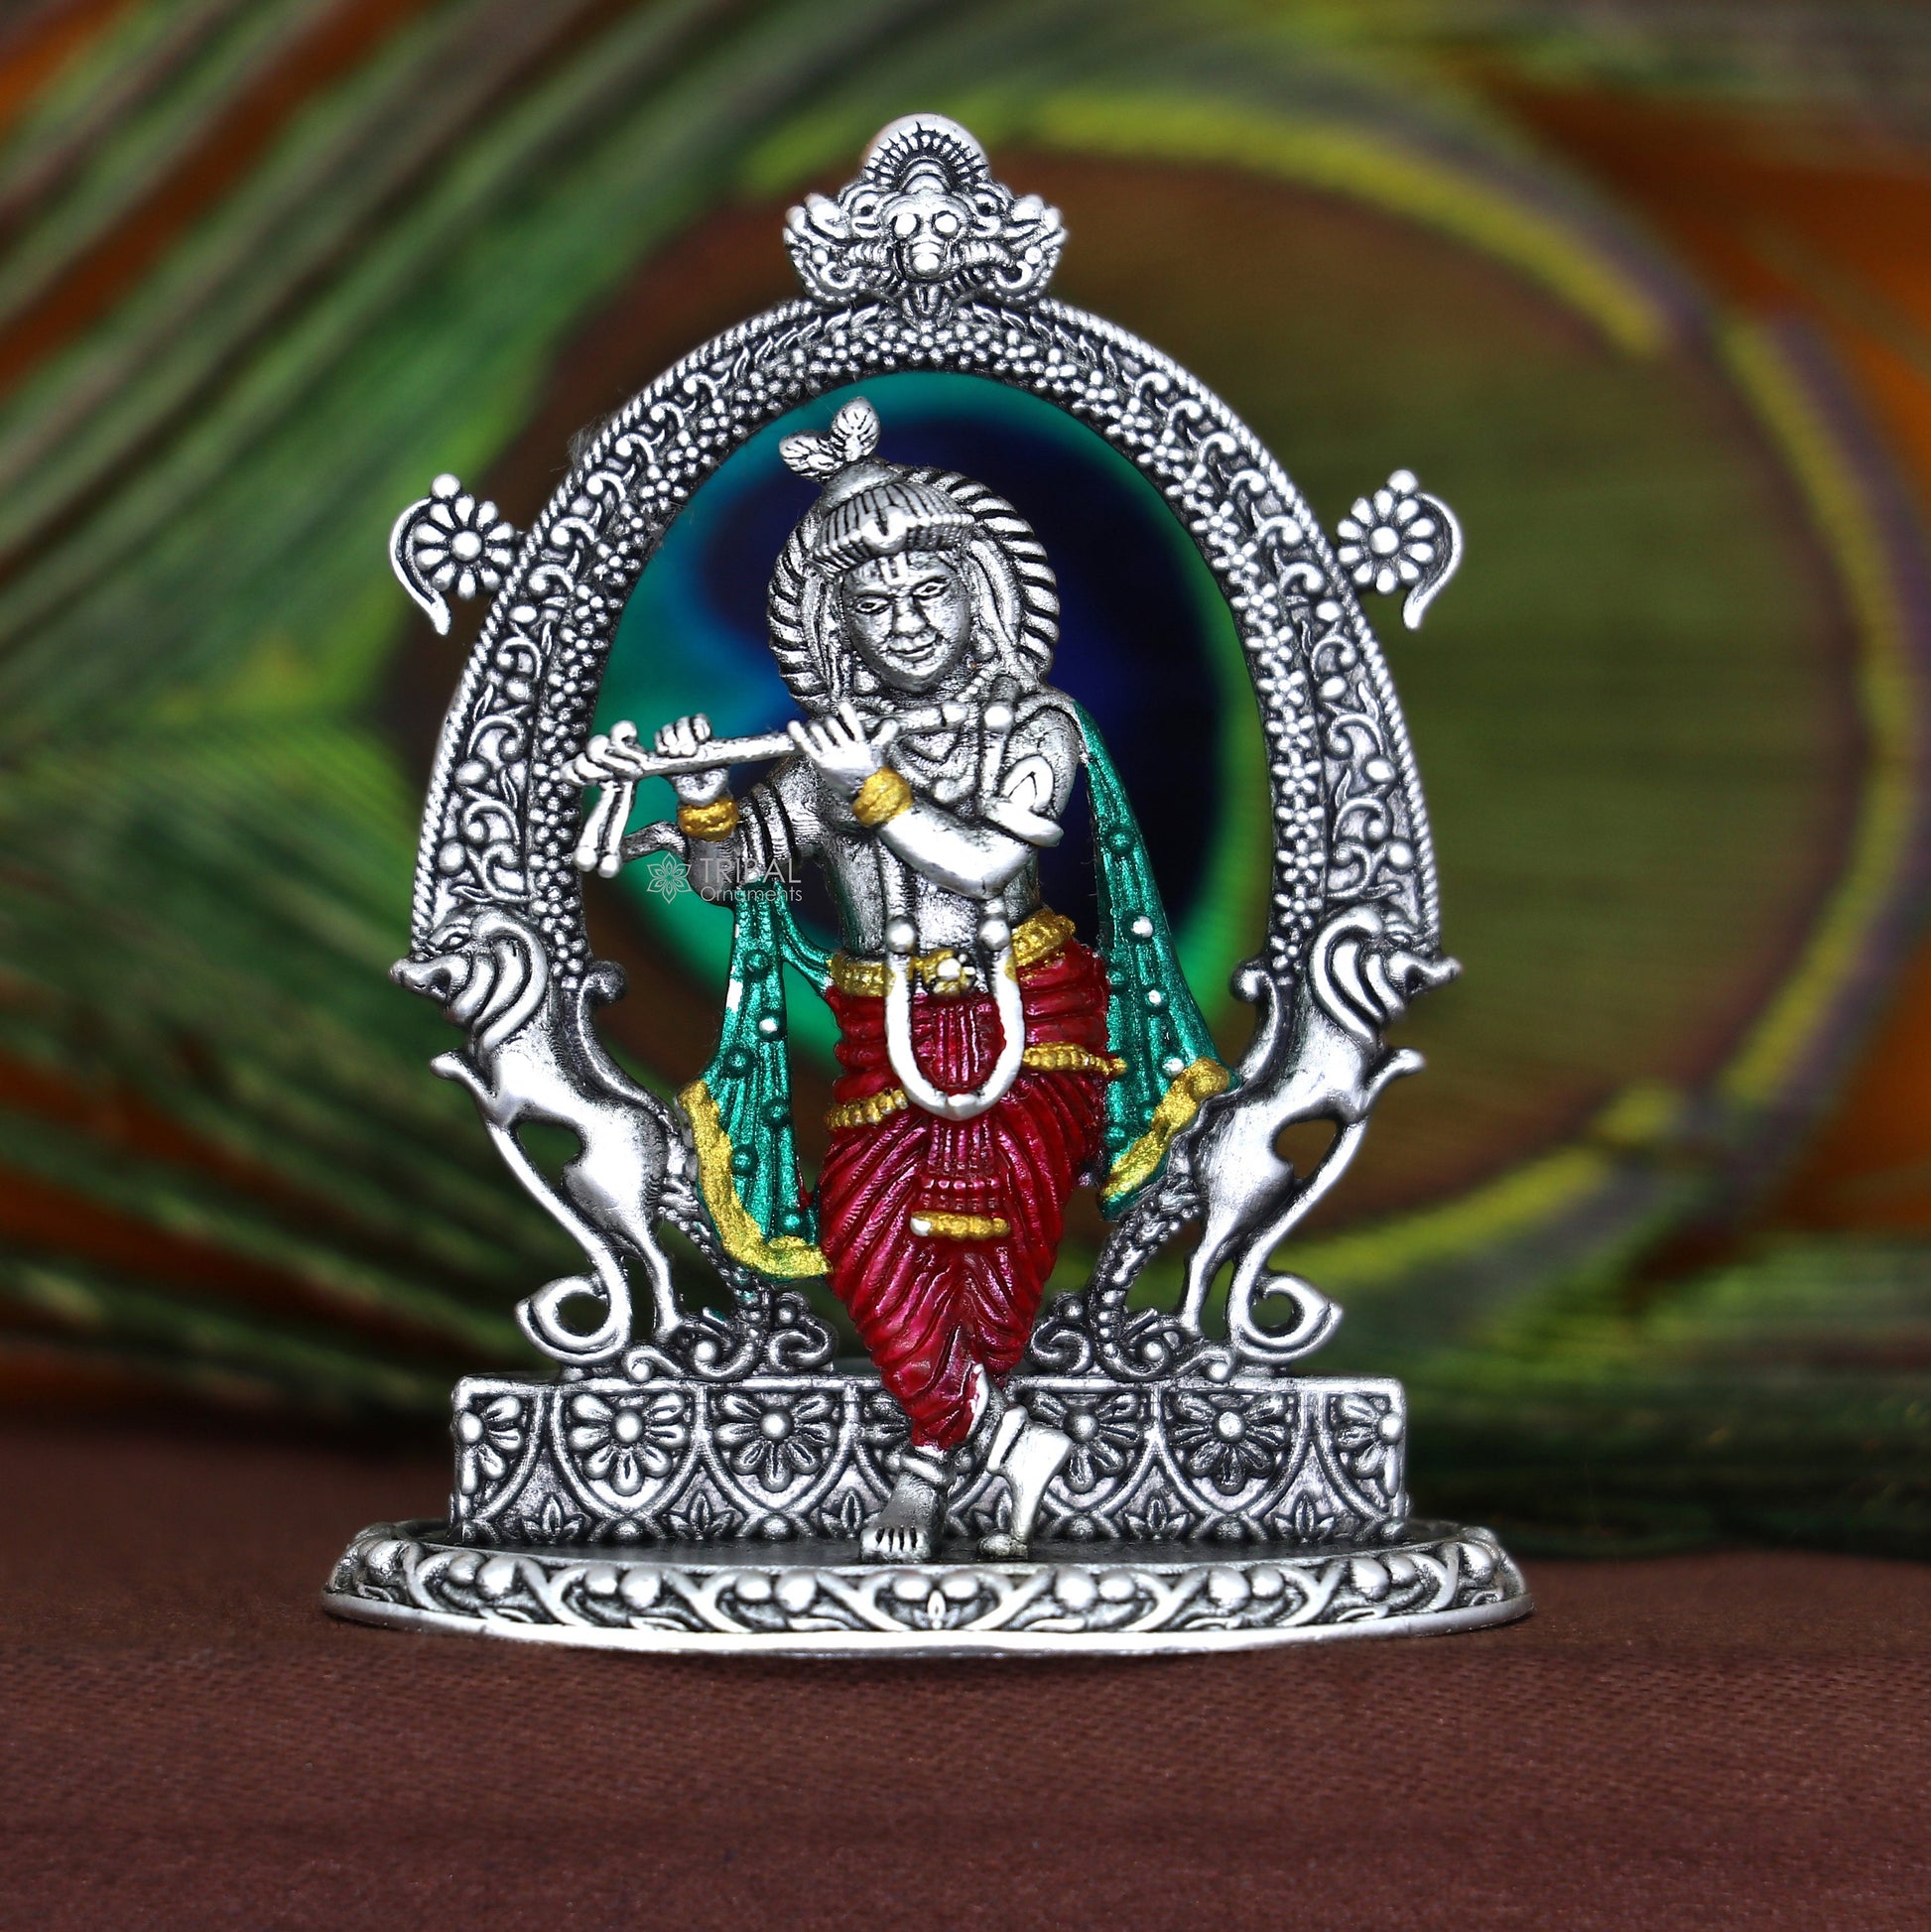 925 Sterling silver handmade Idols Lord Krishna with flute standing Statue figurine, puja articles divine decorative gift art689 - TRIBAL ORNAMENTS